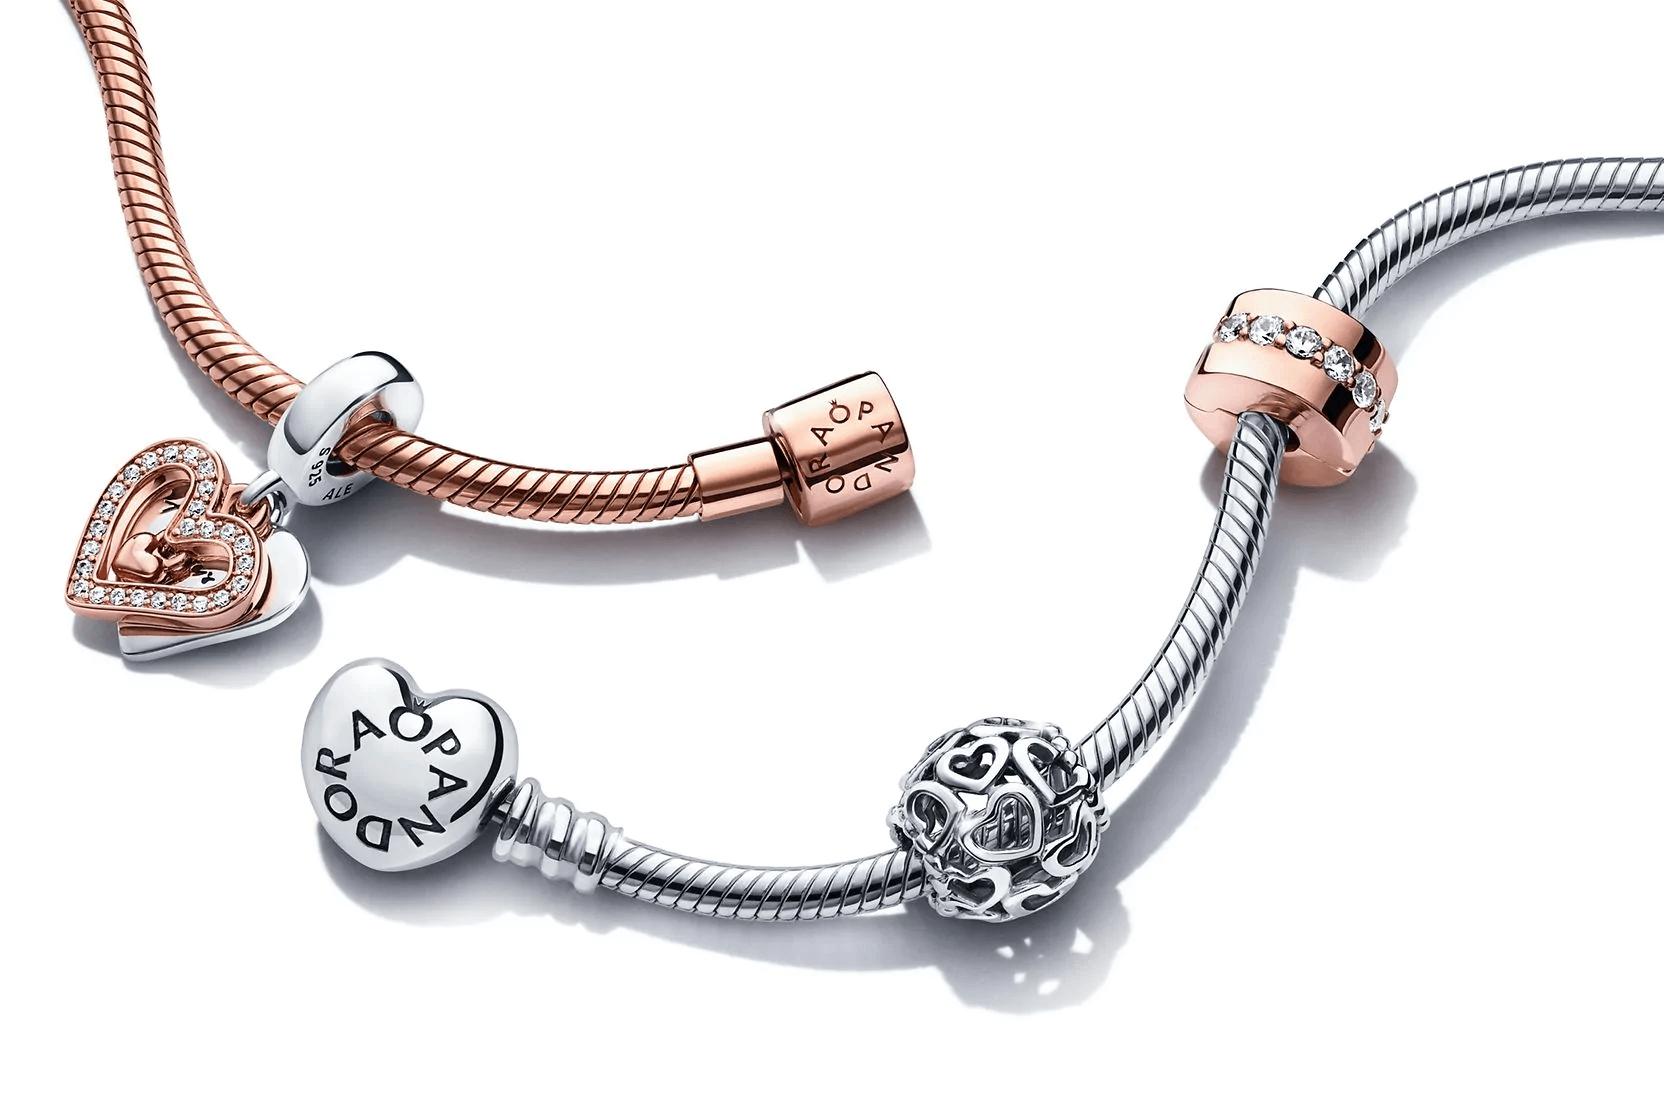 Teachers and students get a 10% education discount on Pandora jewelry and charms.